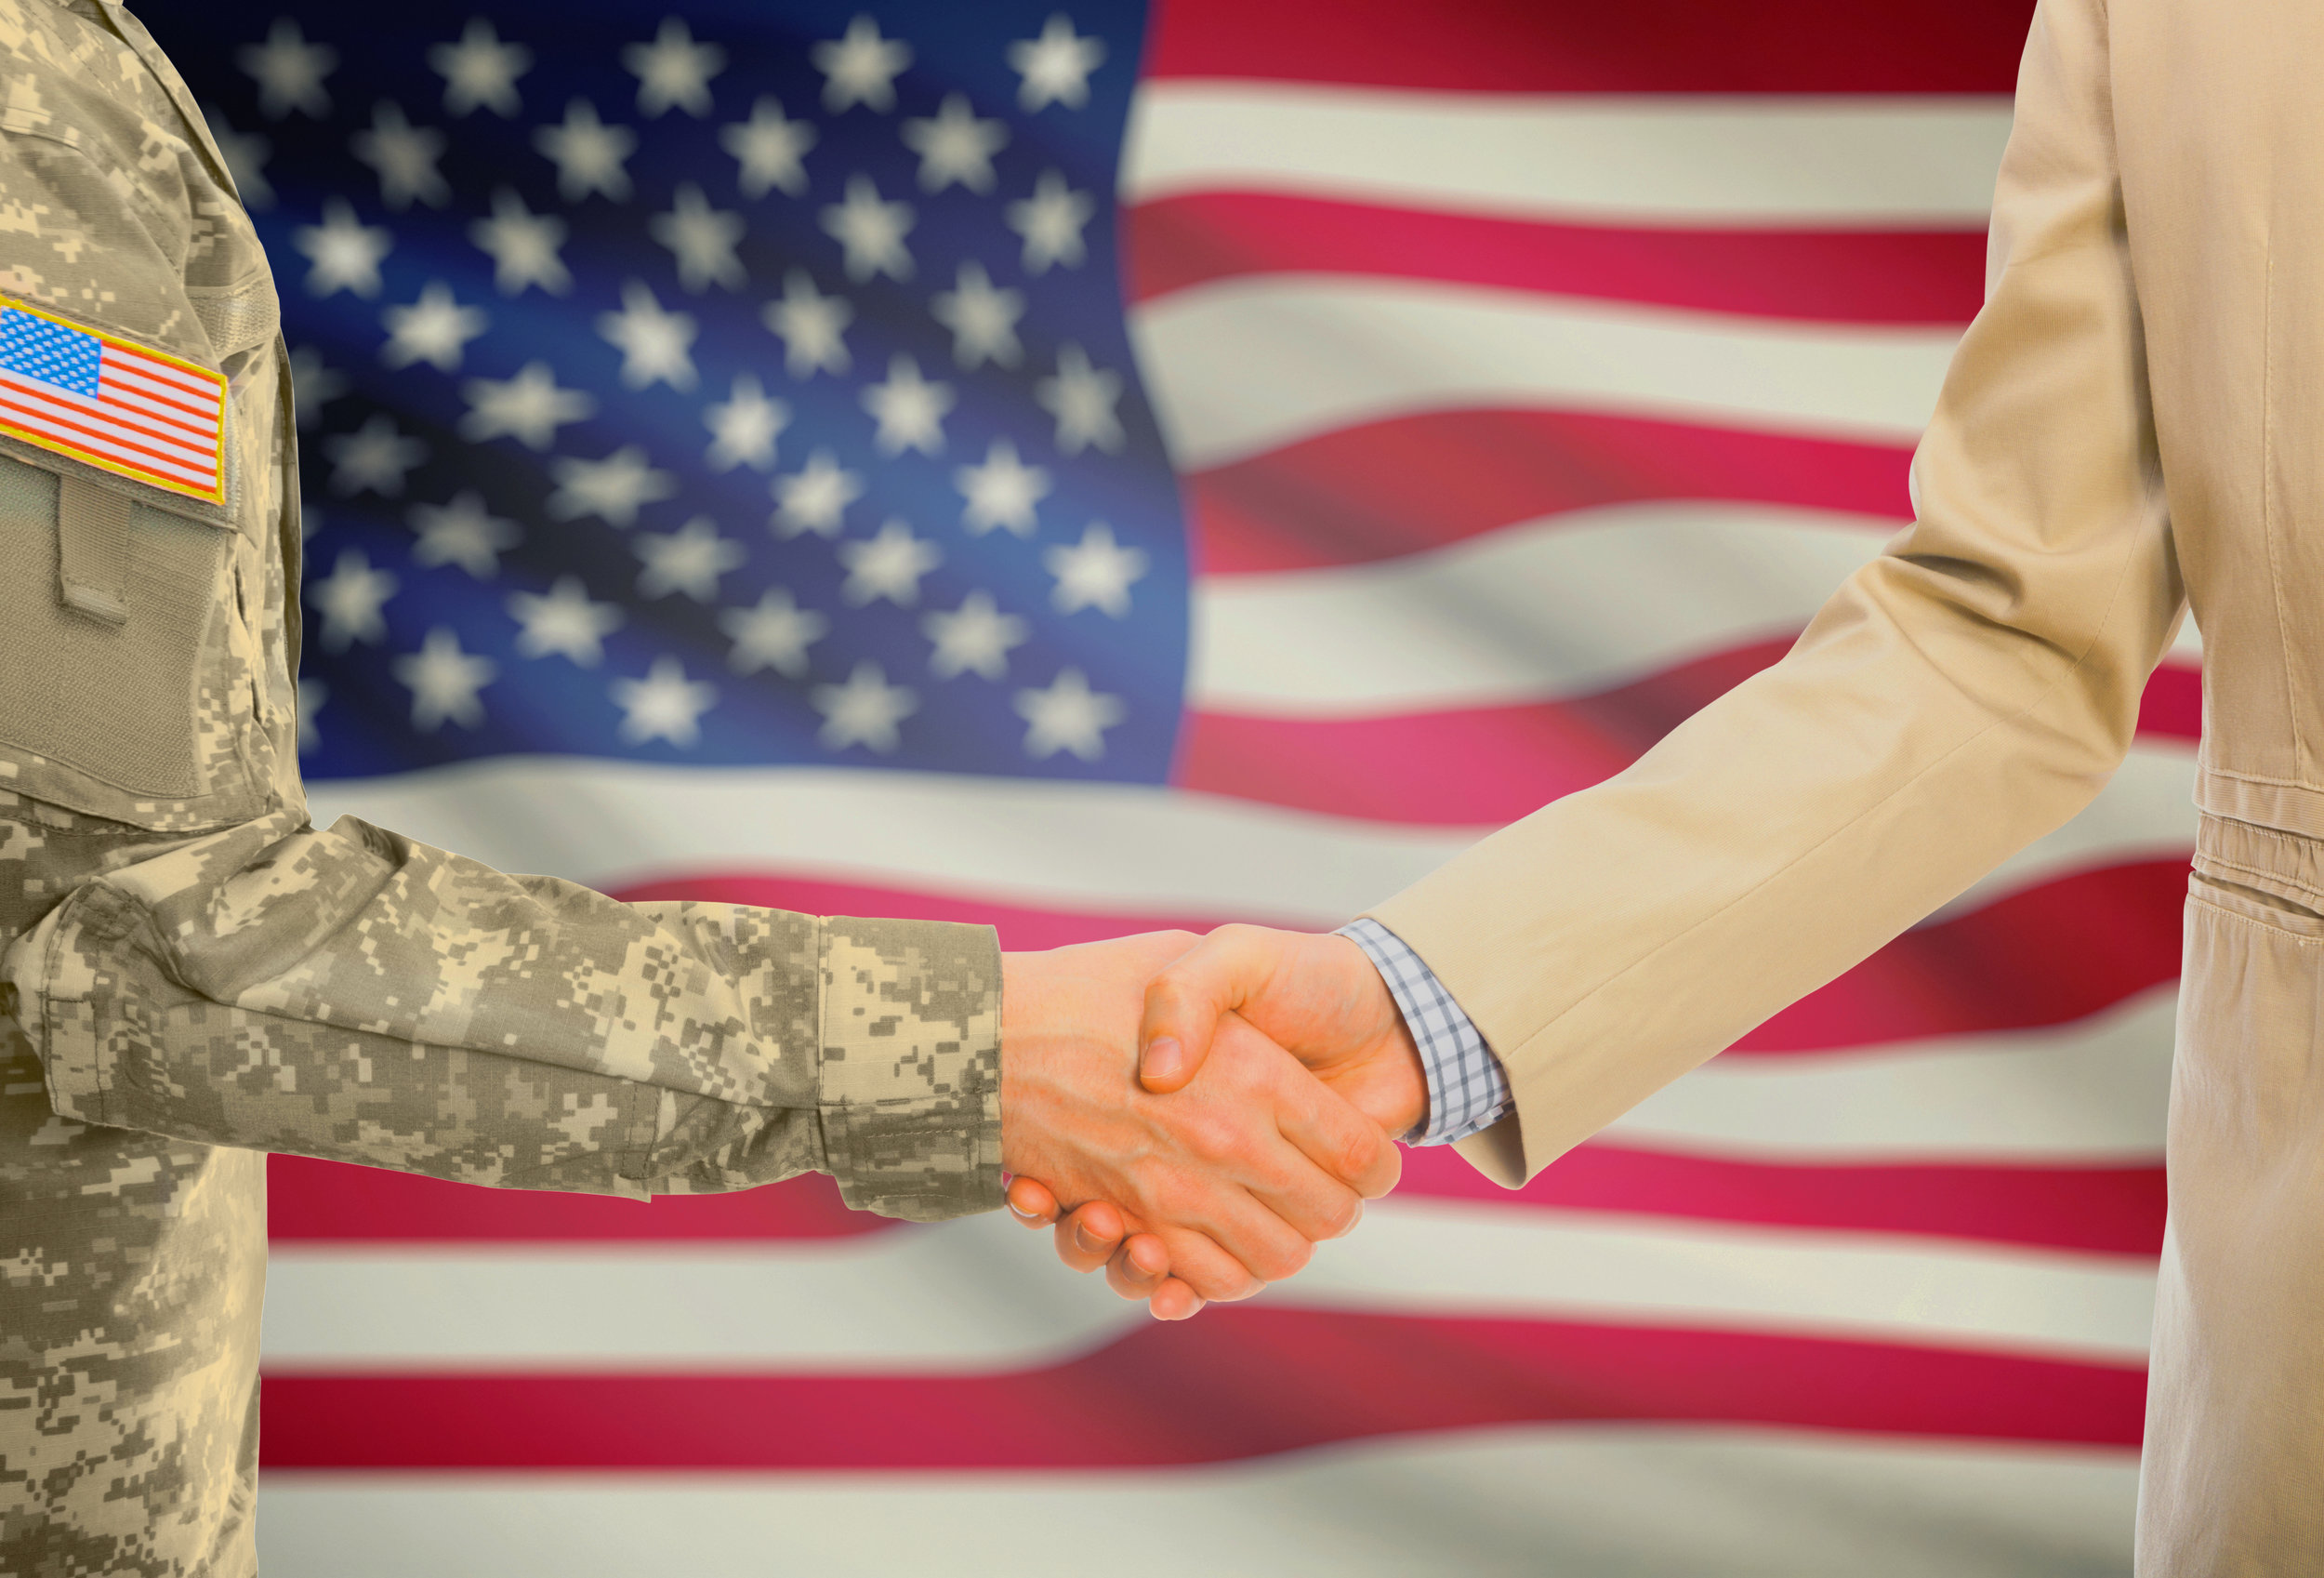   VETERANS   it’s not just the right thing to do - it’s good for your business   Learn More  